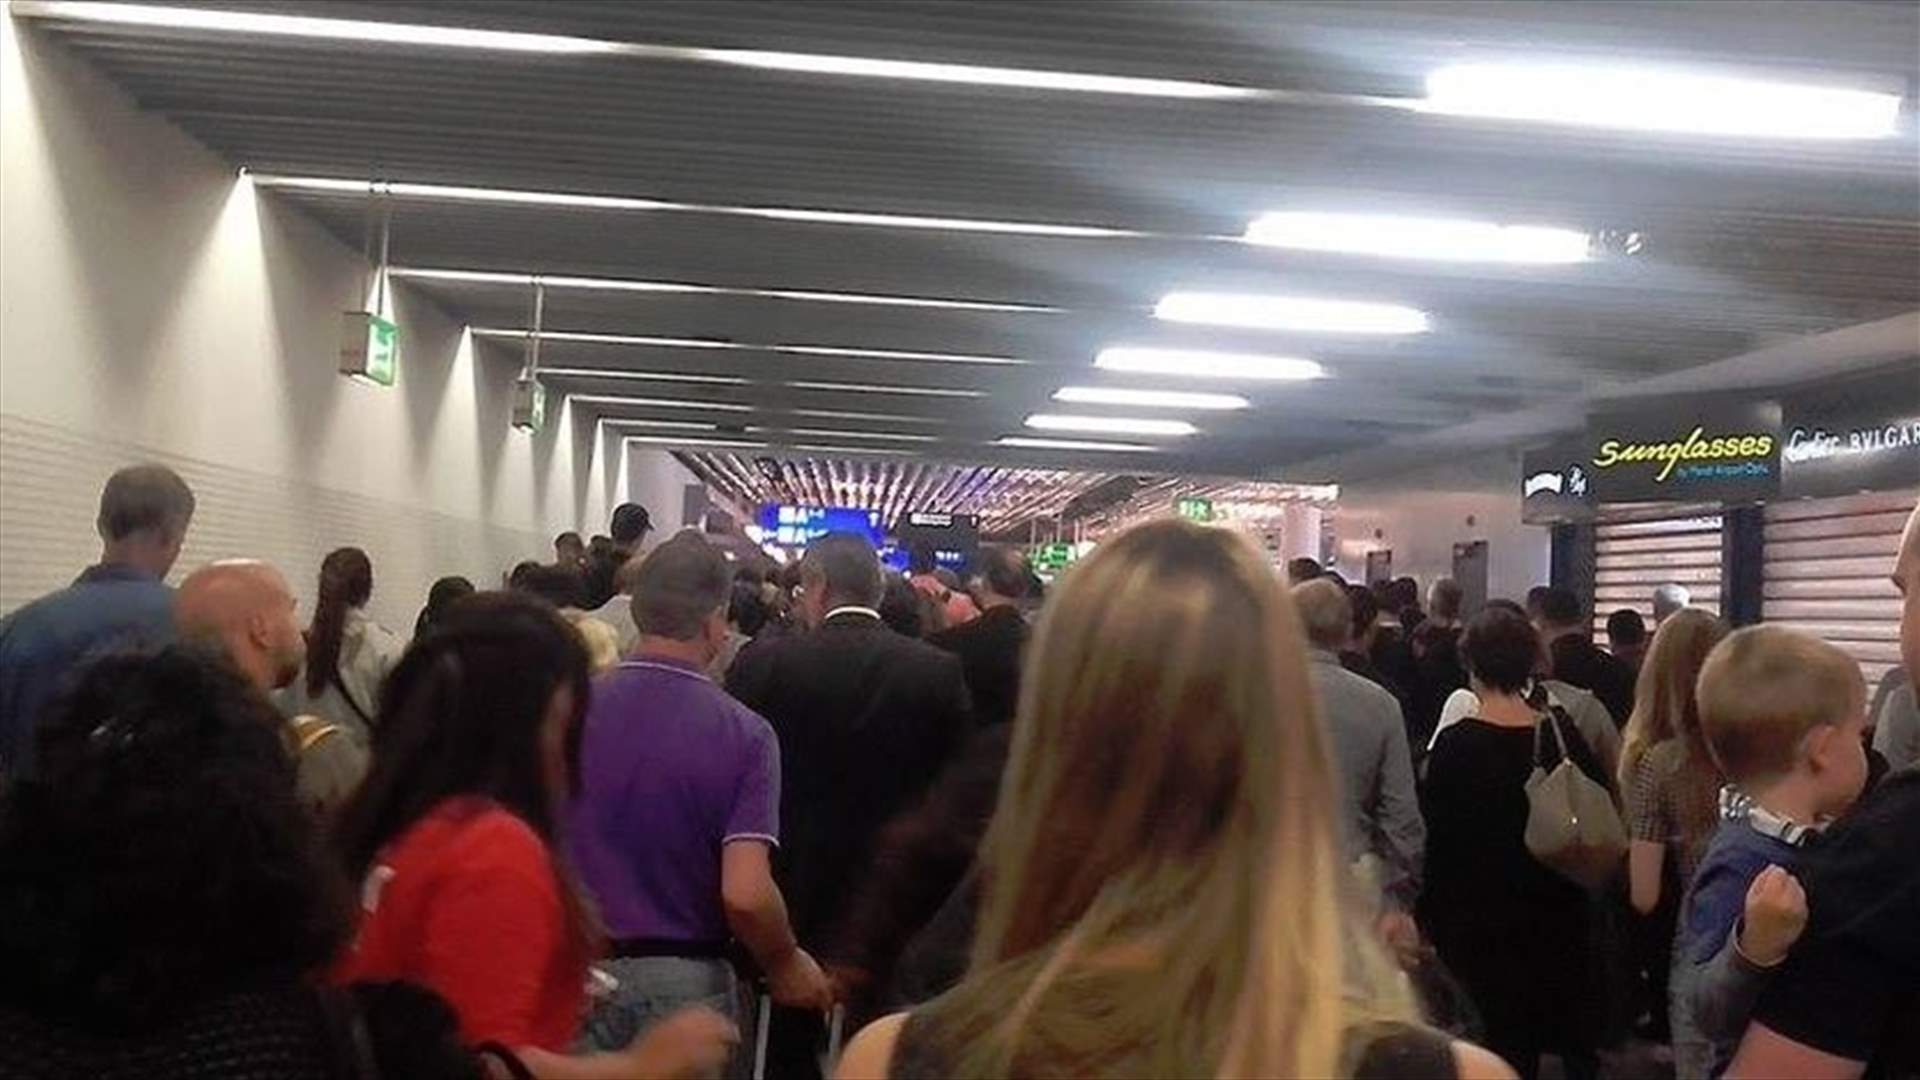 Frankfurt airport departure hall evacuated after passenger breaches security